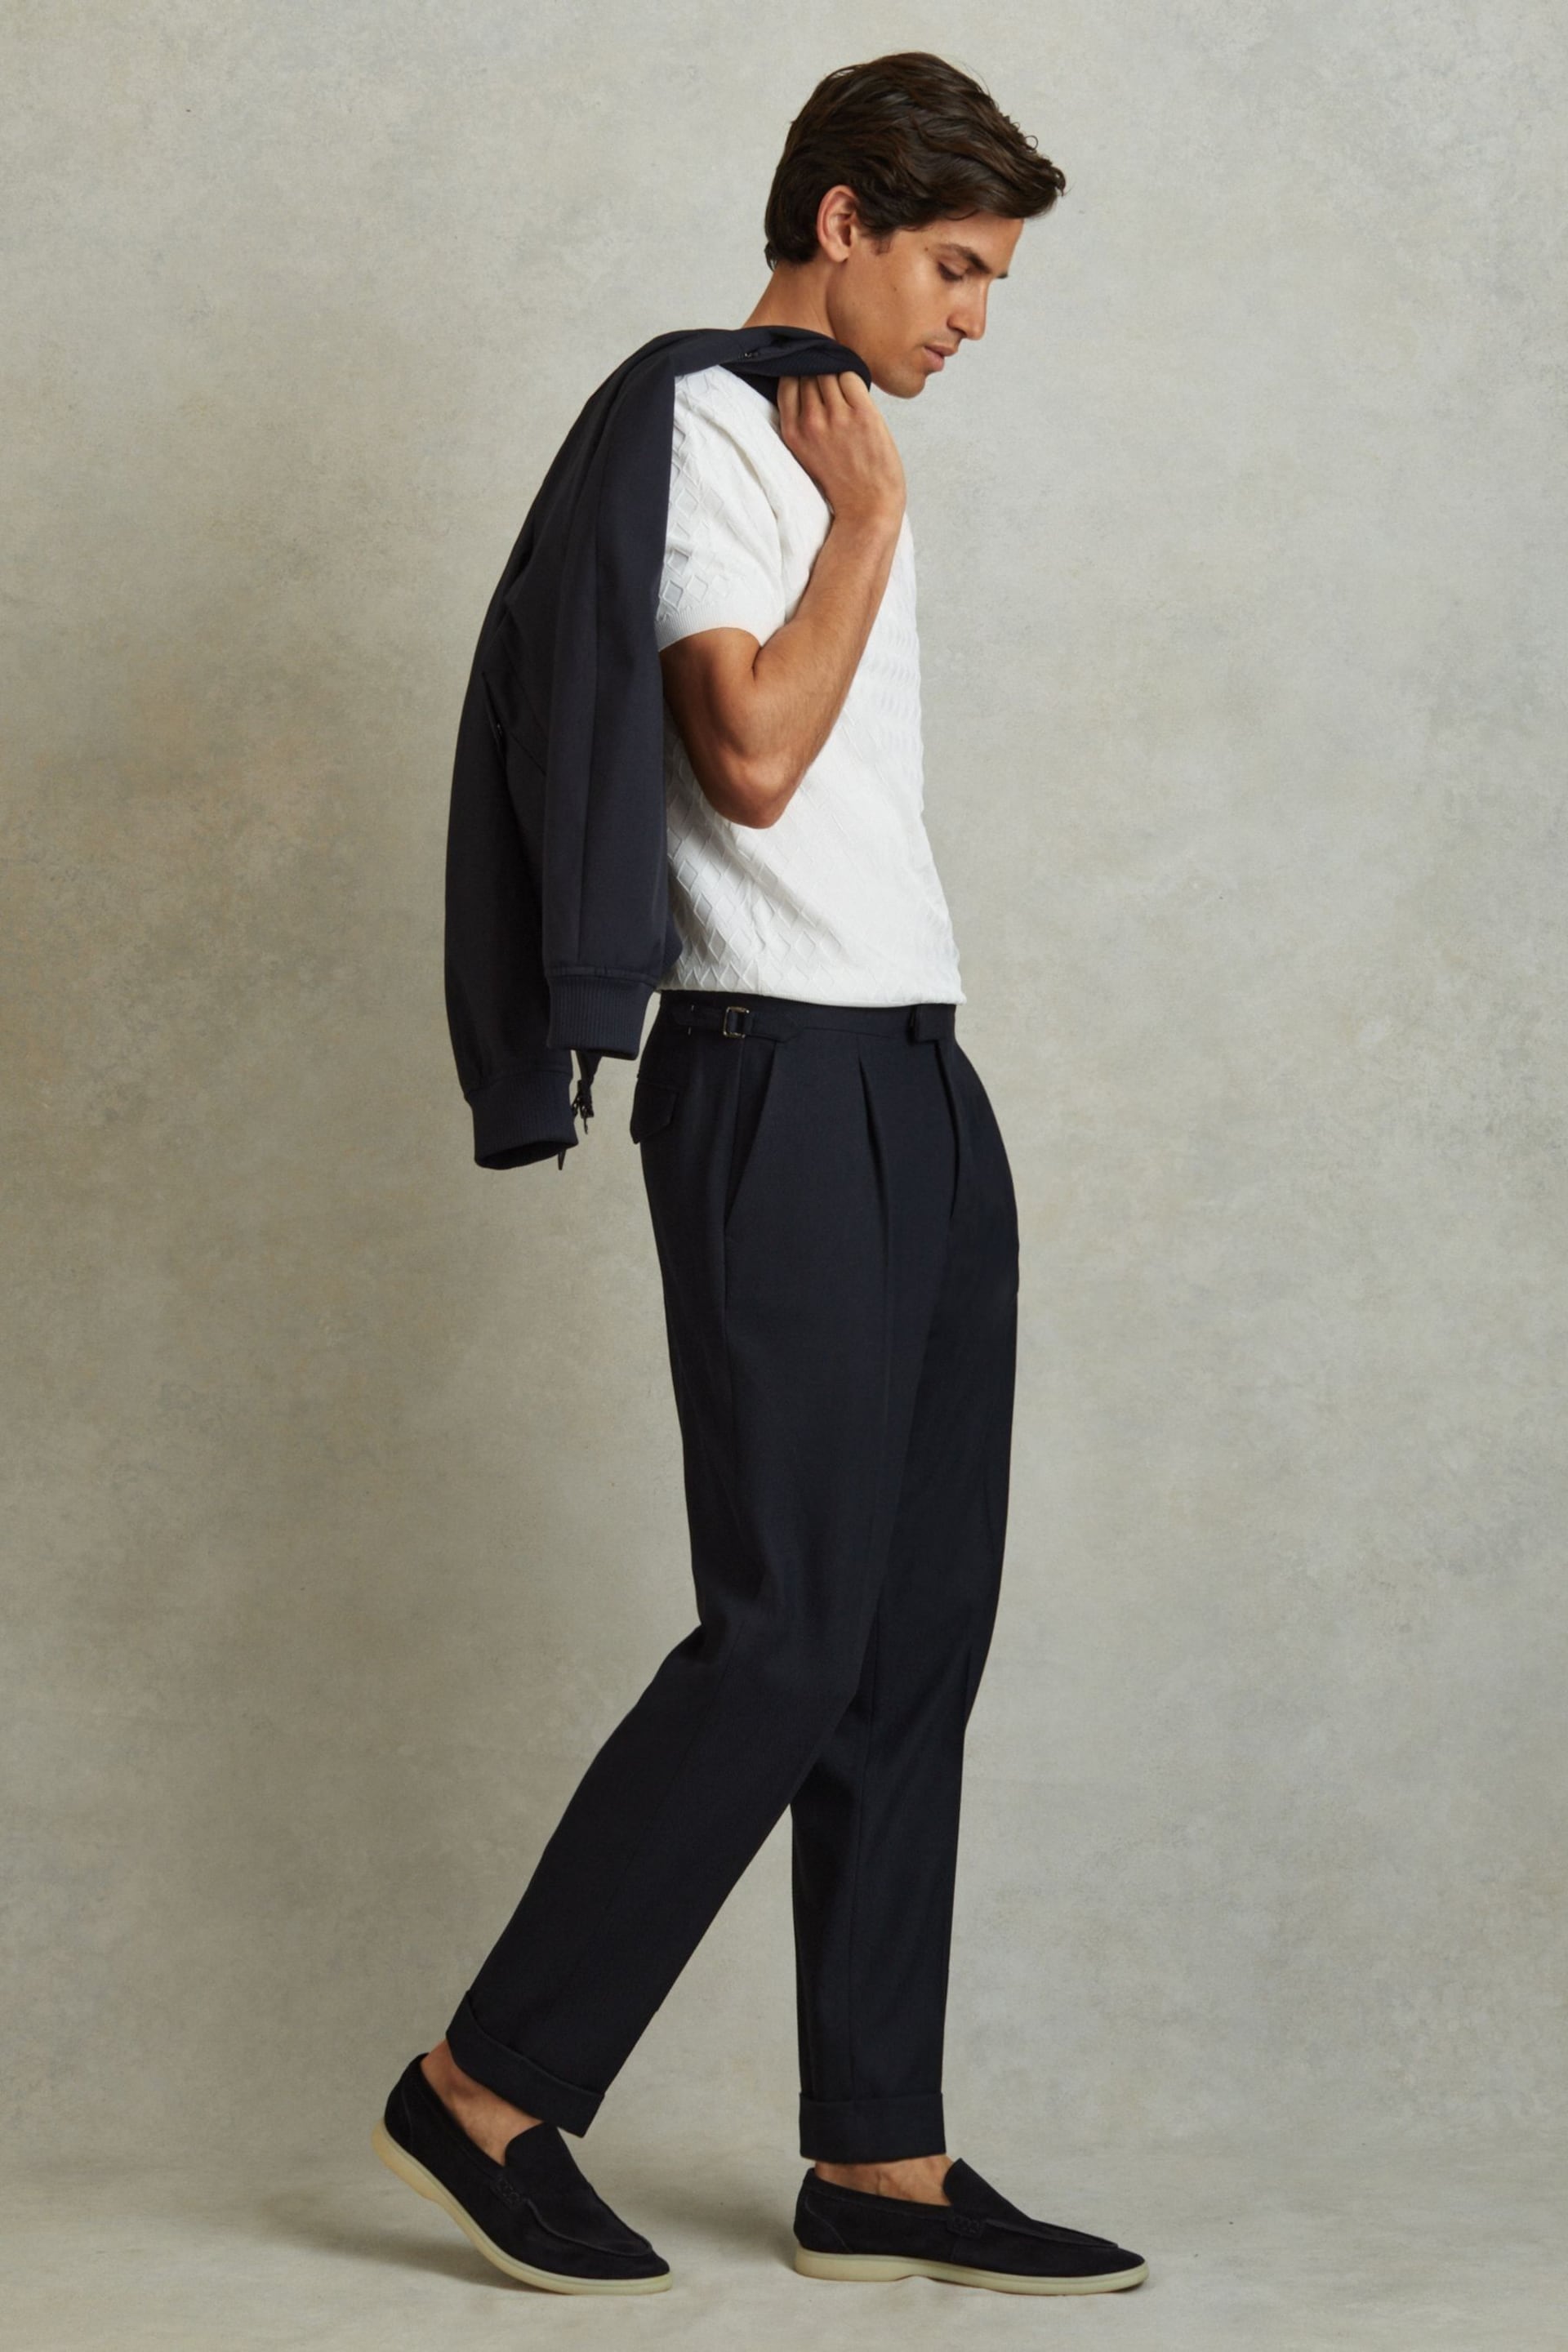 Reiss Navy Bridge Textured Side Adjuster Trousers with Turn-Ups - Image 1 of 5